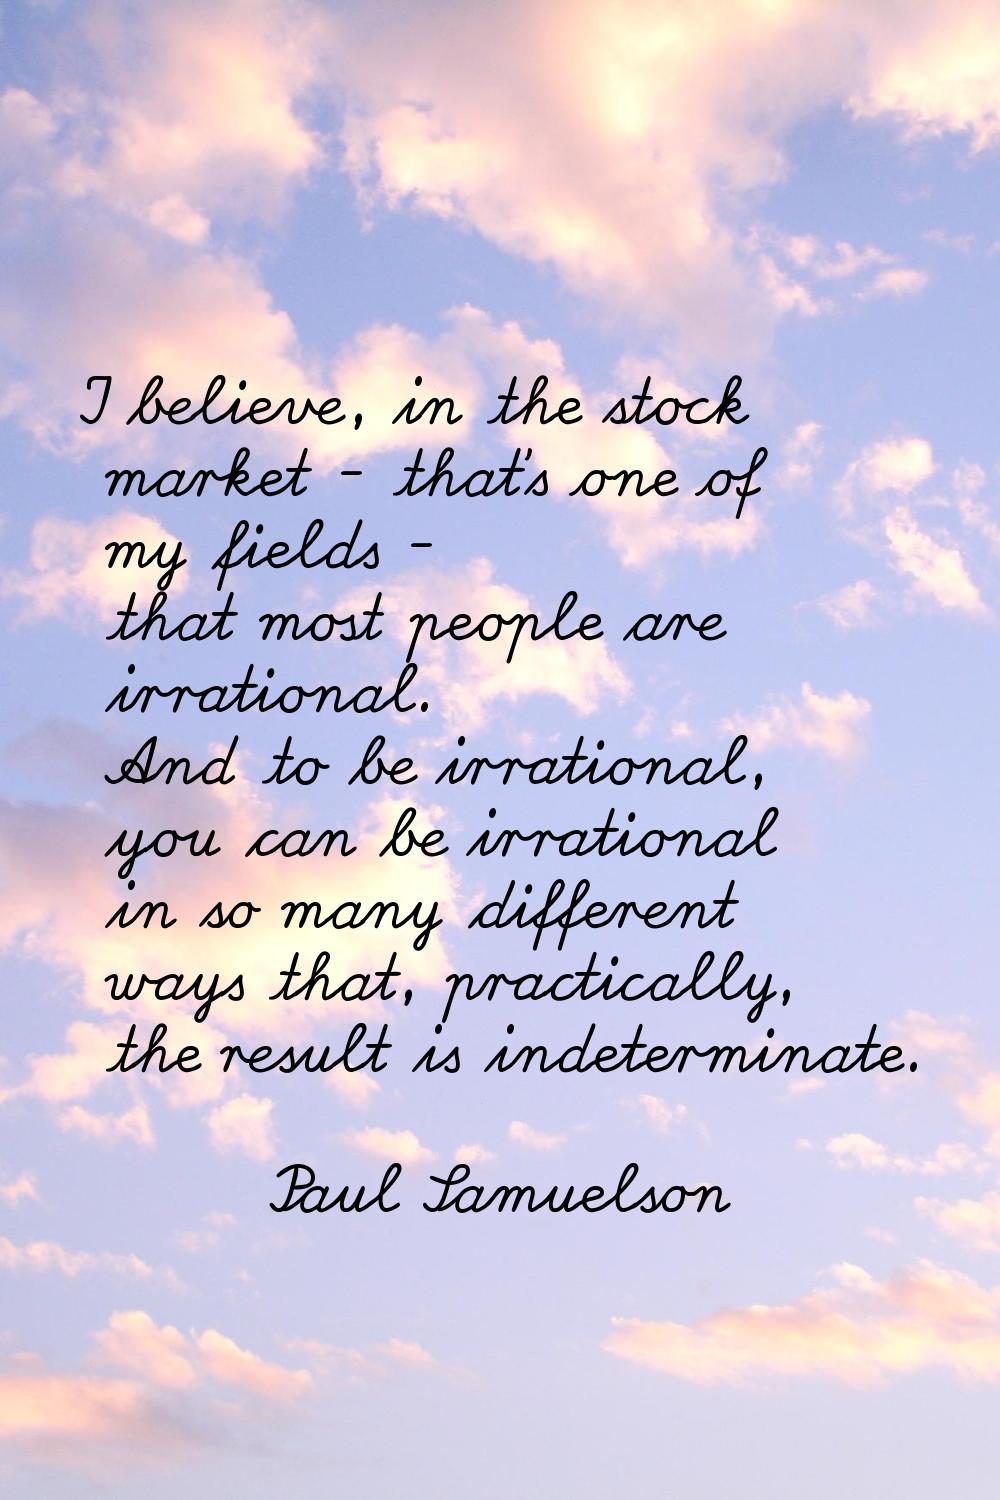 I believe, in the stock market - that's one of my fields - that most people are irrational. And to 